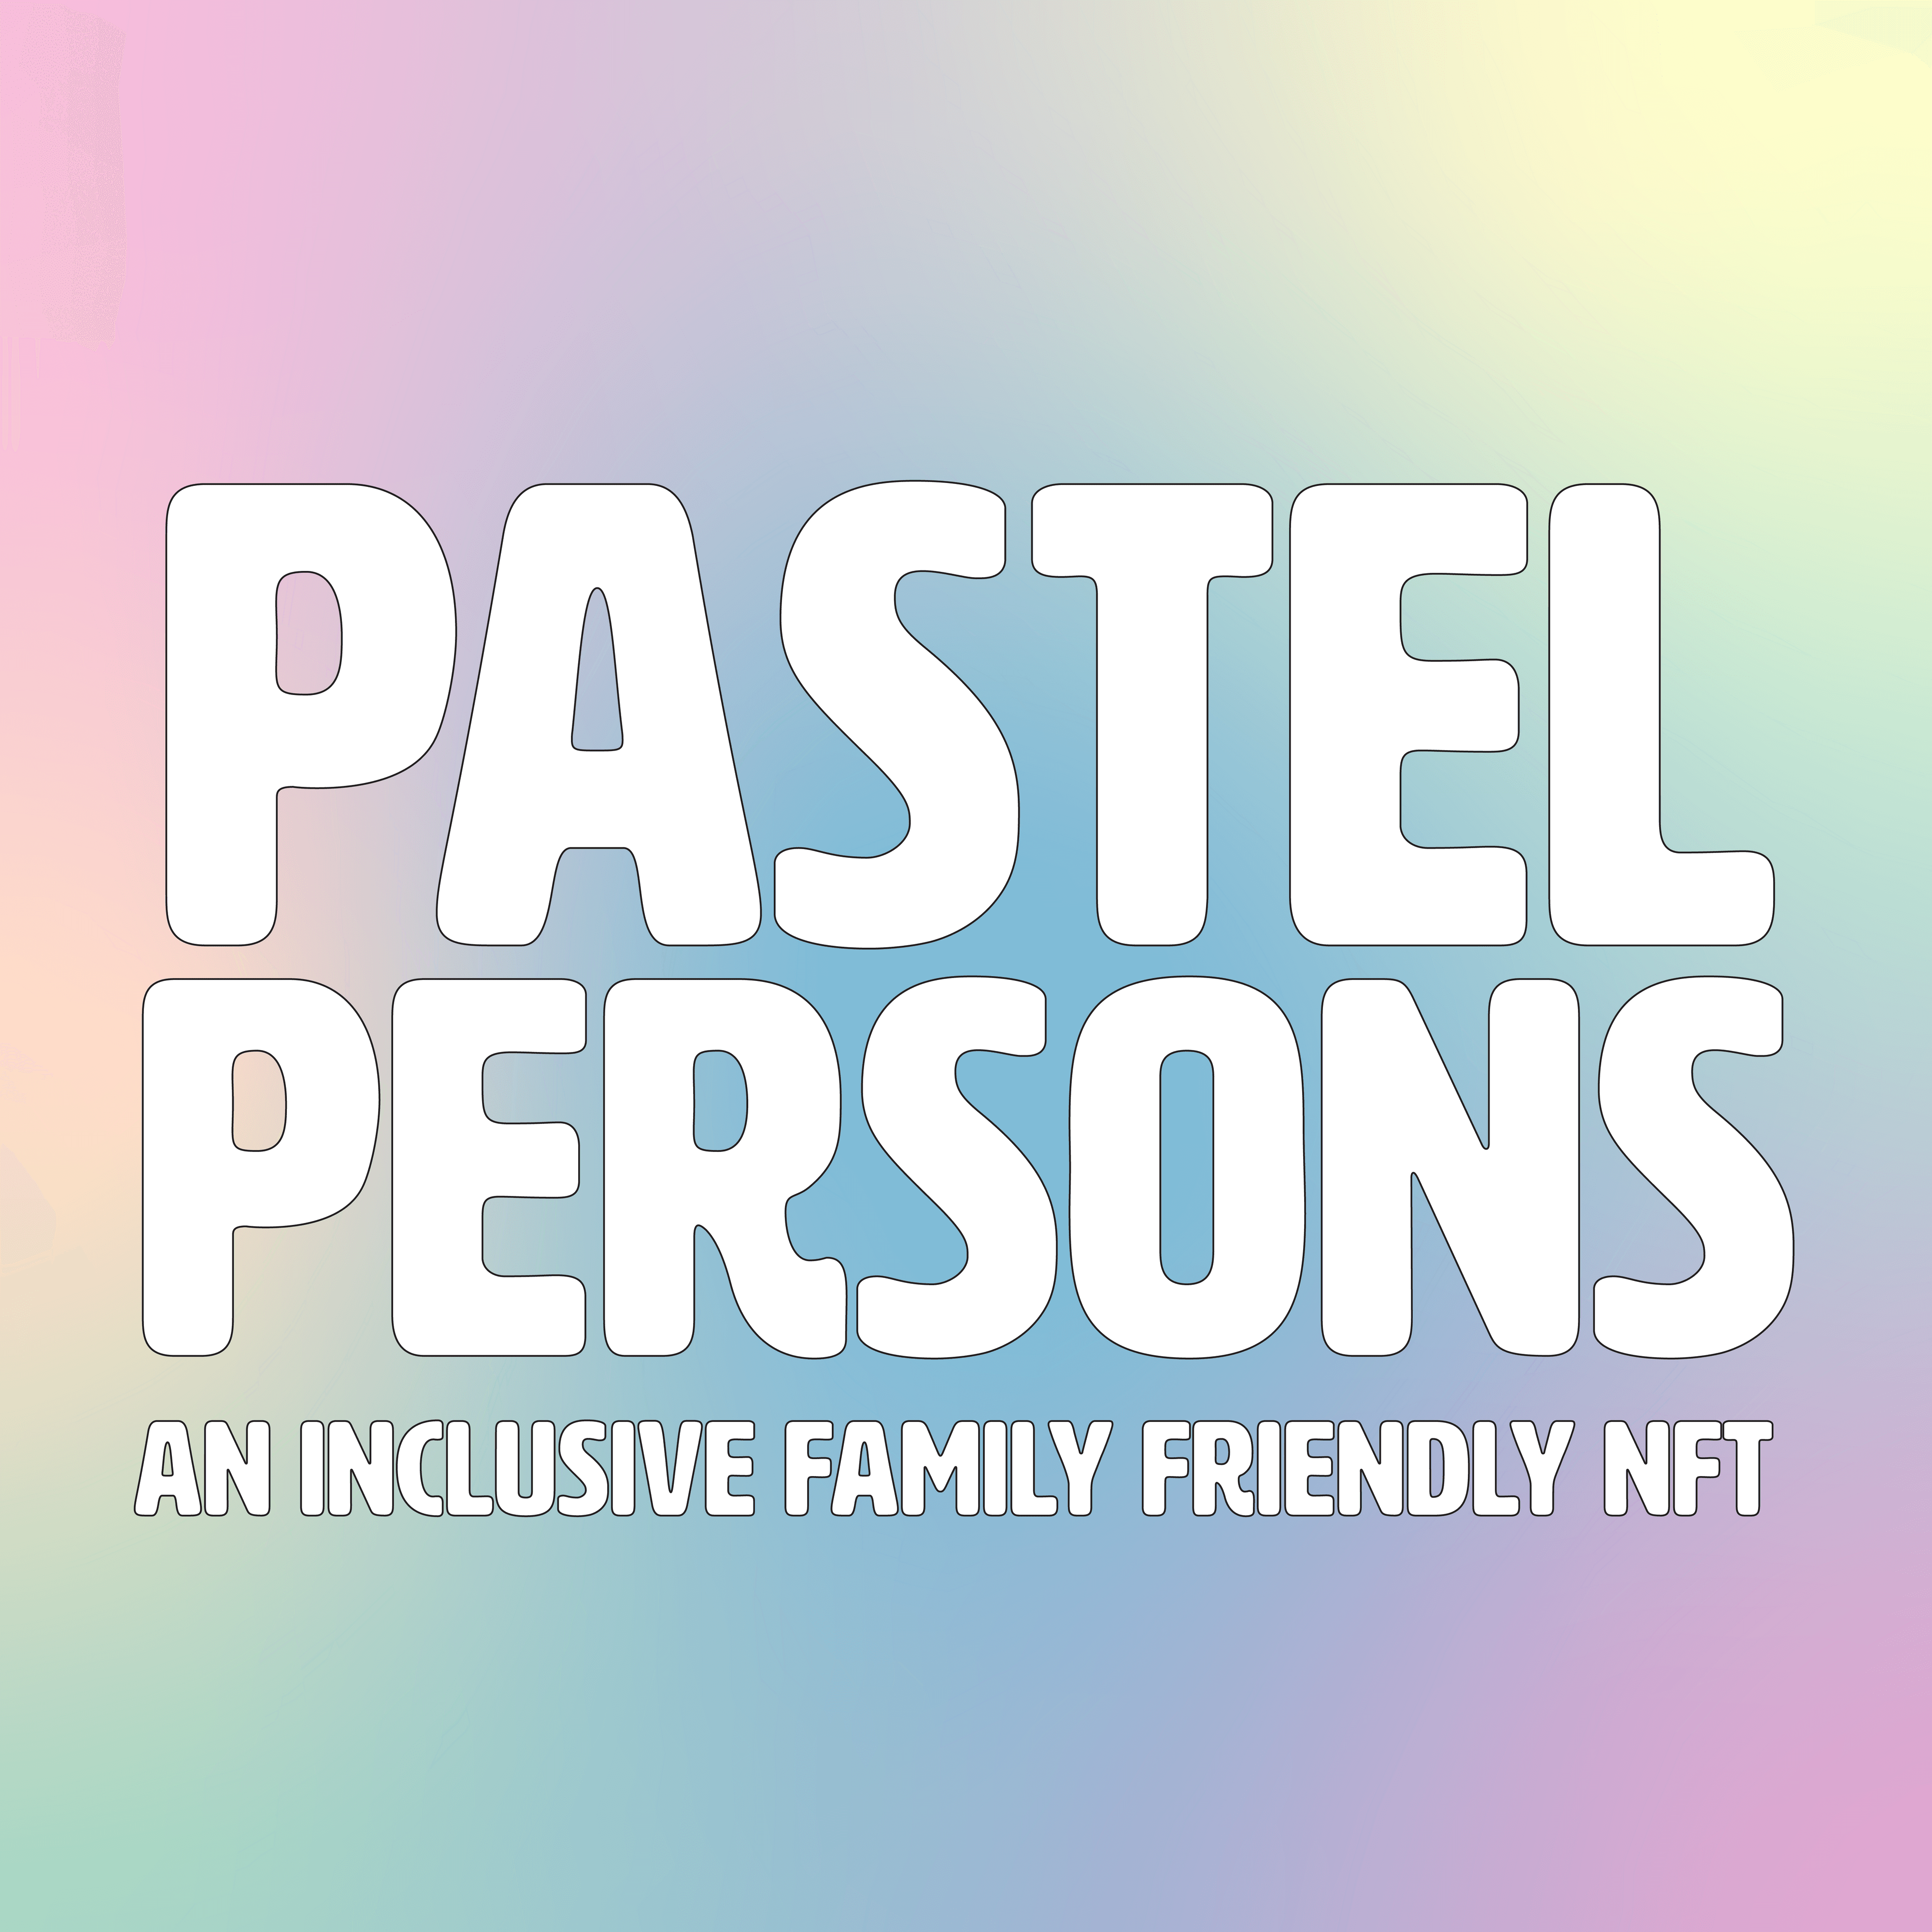 Pastel Persons